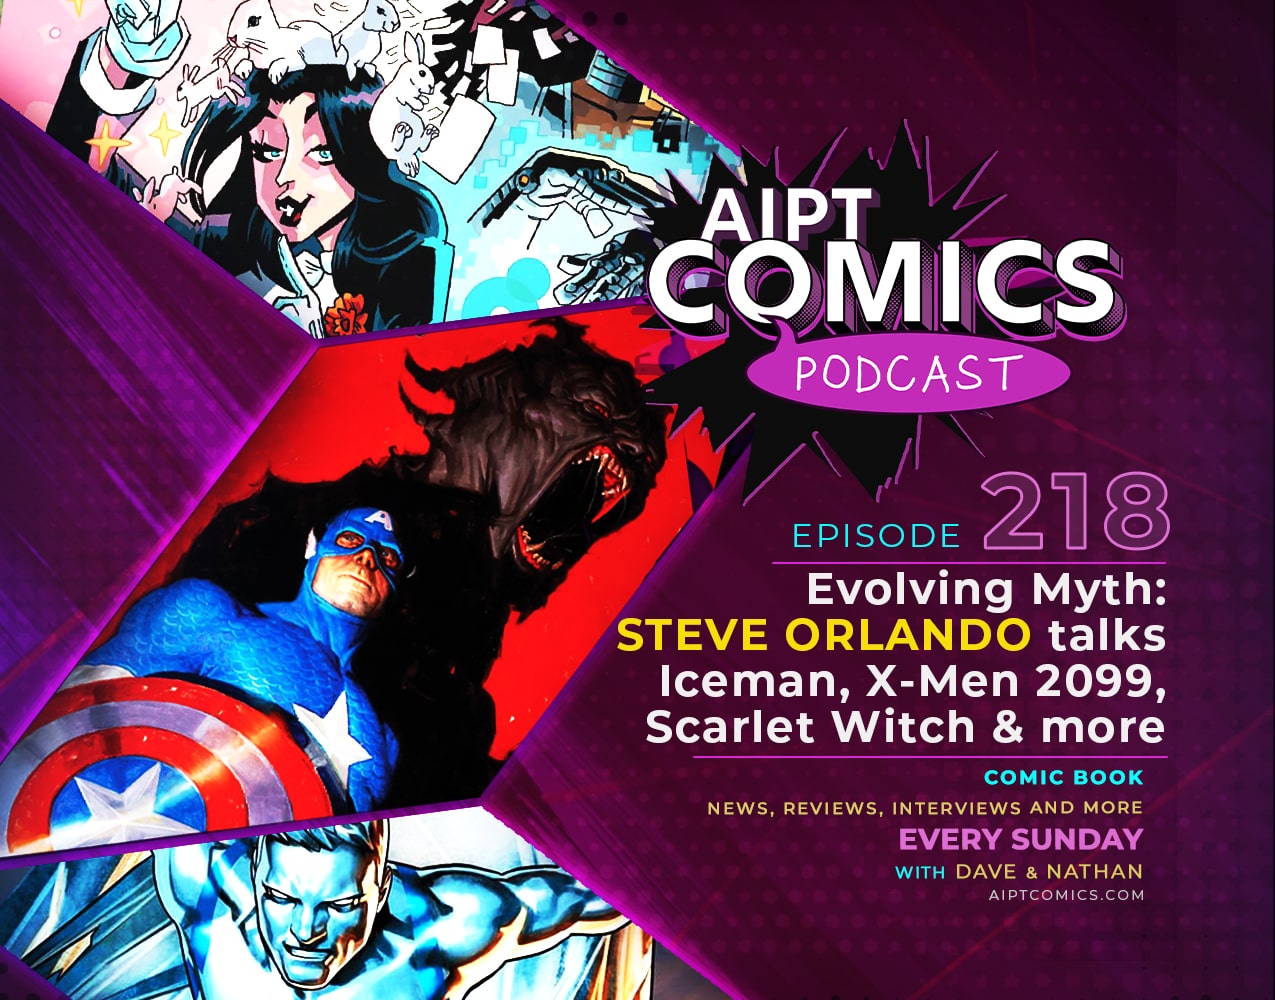 AIPT Comics Podcast episode 218: Evolving Myth: Steve Orlando talks Iceman, X-Men 2099, Scarlet Witch and more